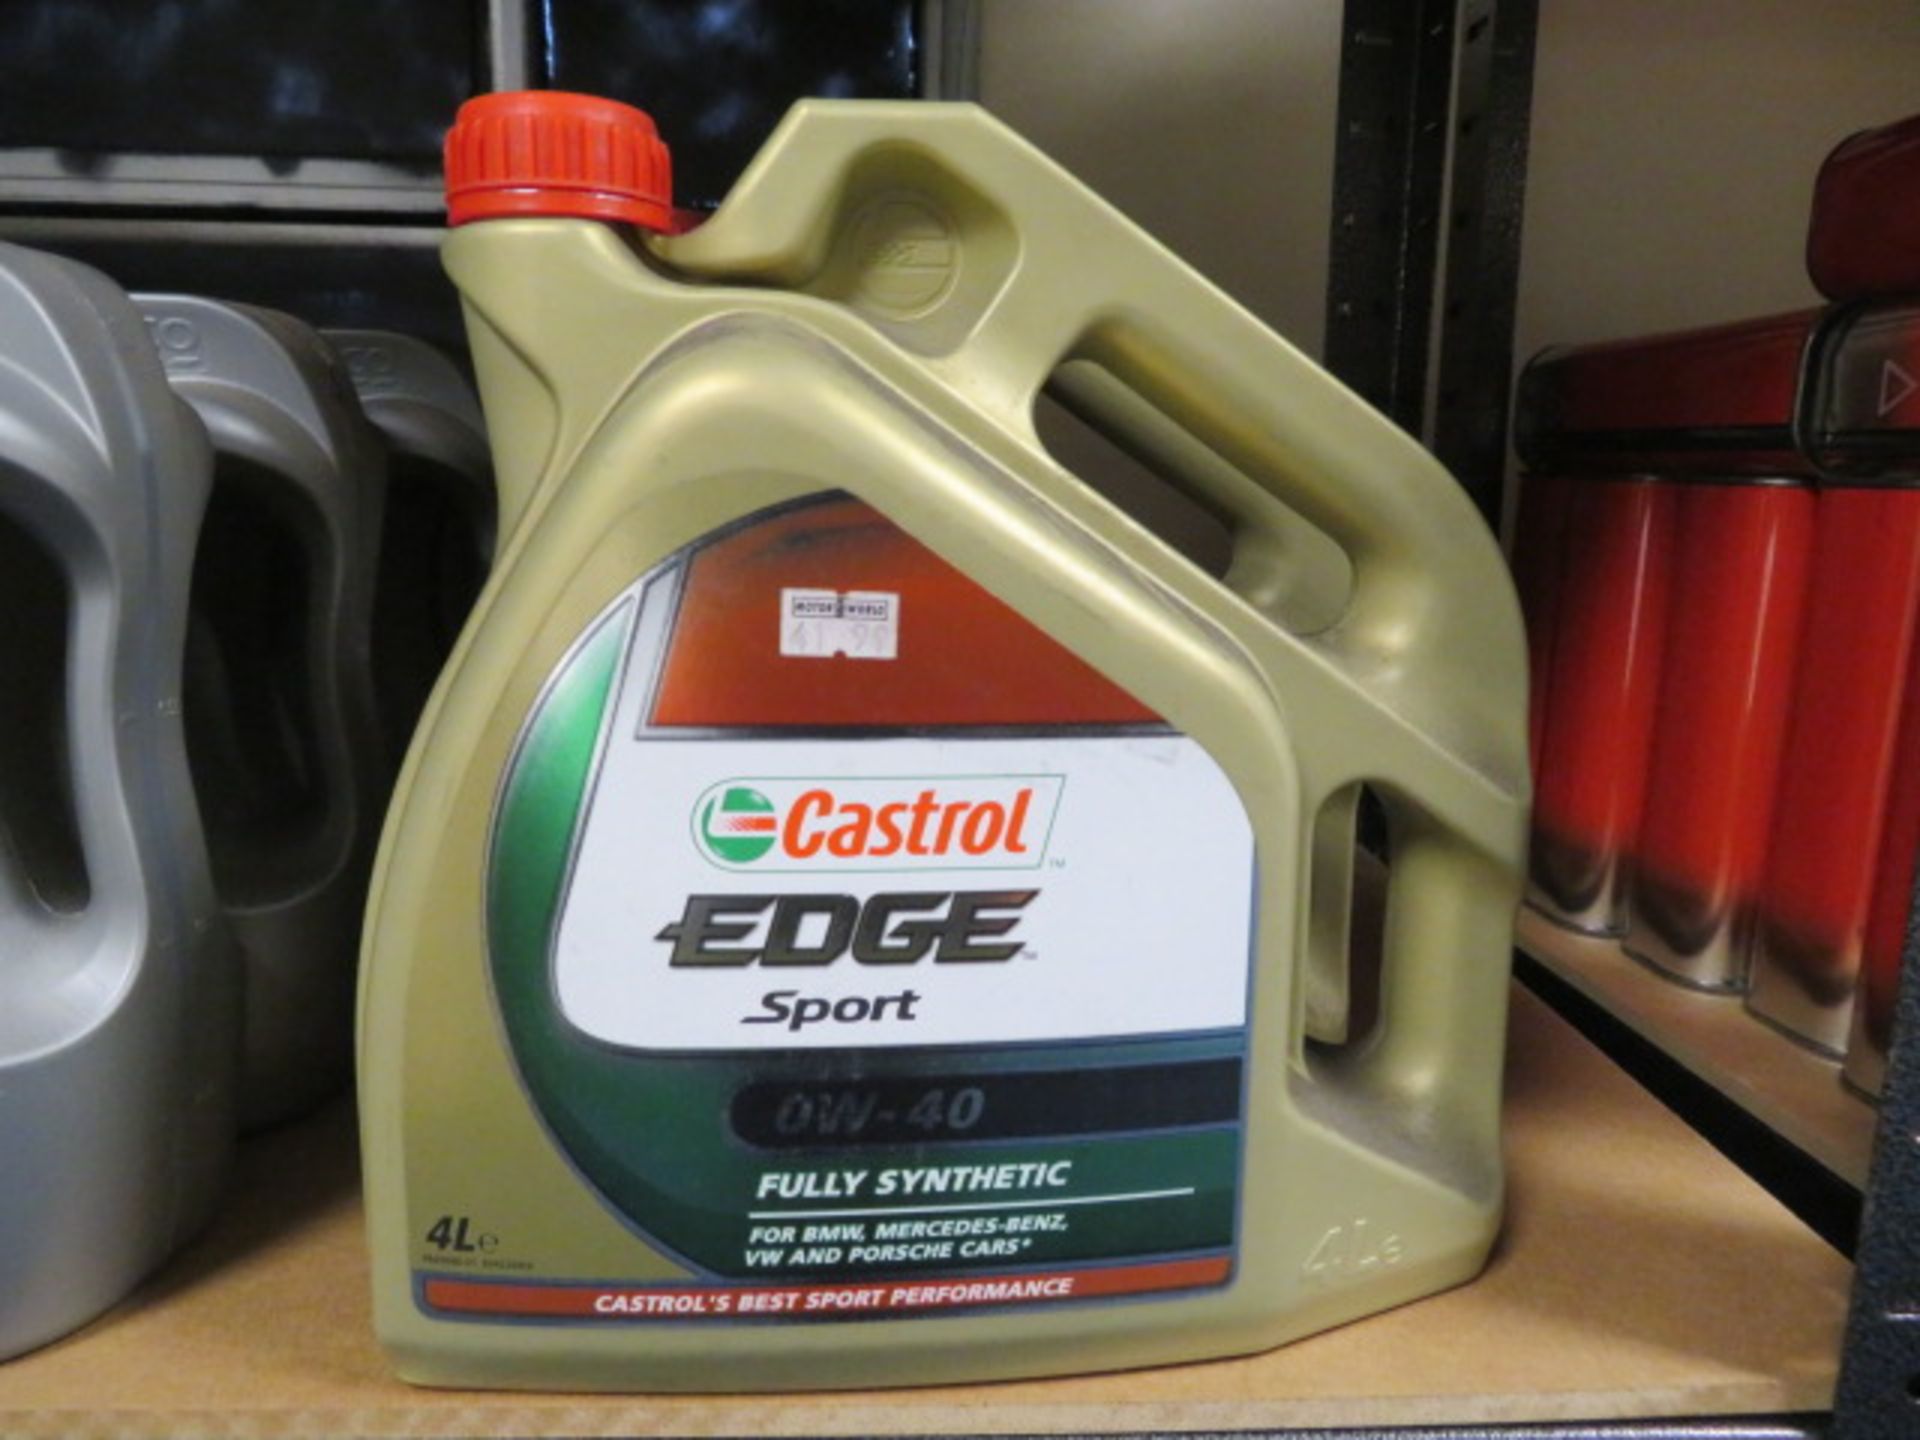 2 x CASTROL EDGE SPORT 0W40 FULLY SYNTHETIC OIL. UK DELIVERY AVAILABLE FROM £14 PLUS VAT. HUGE...